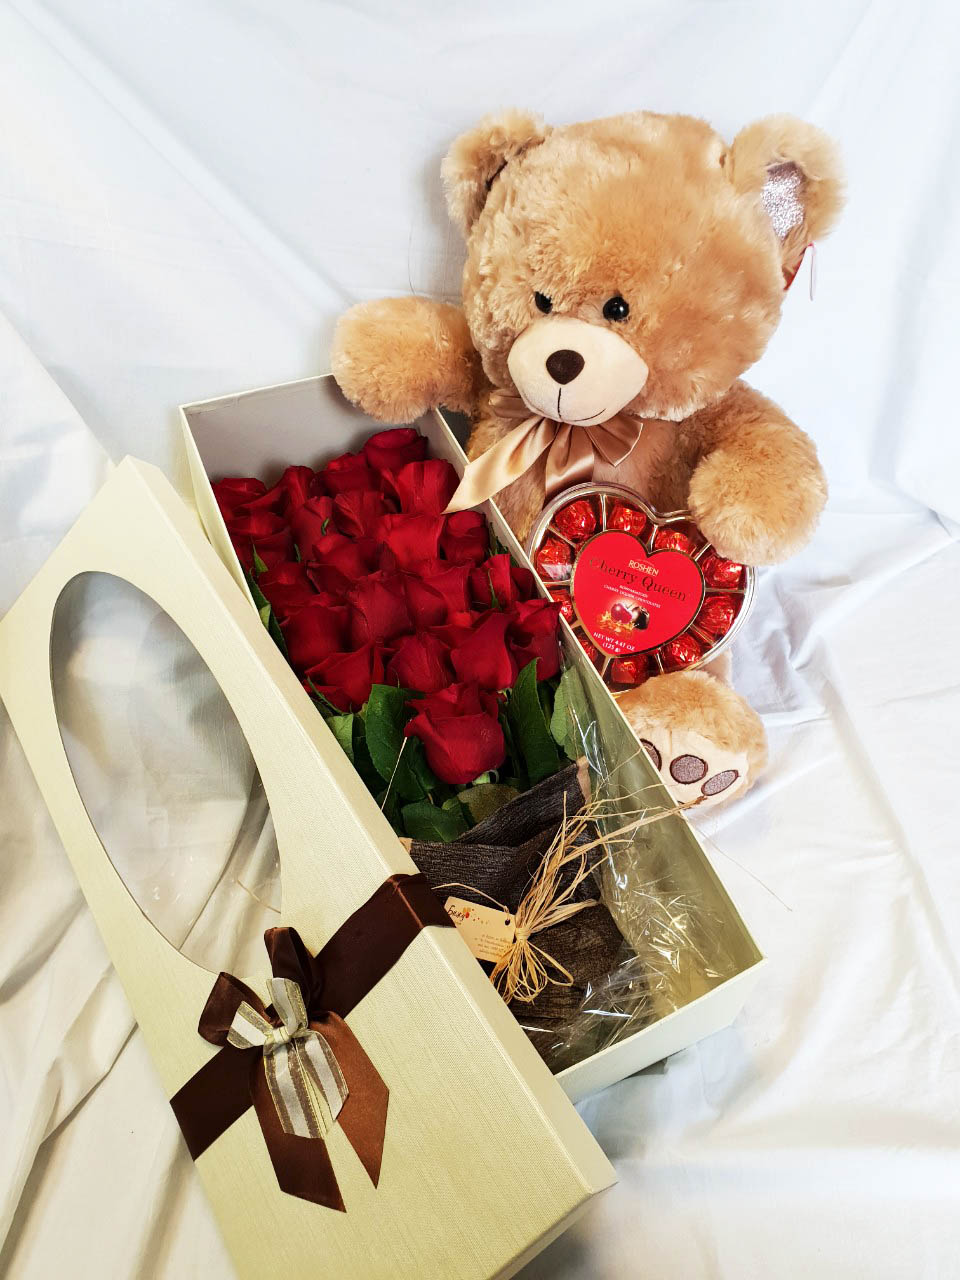 Red roses and Teddy bear